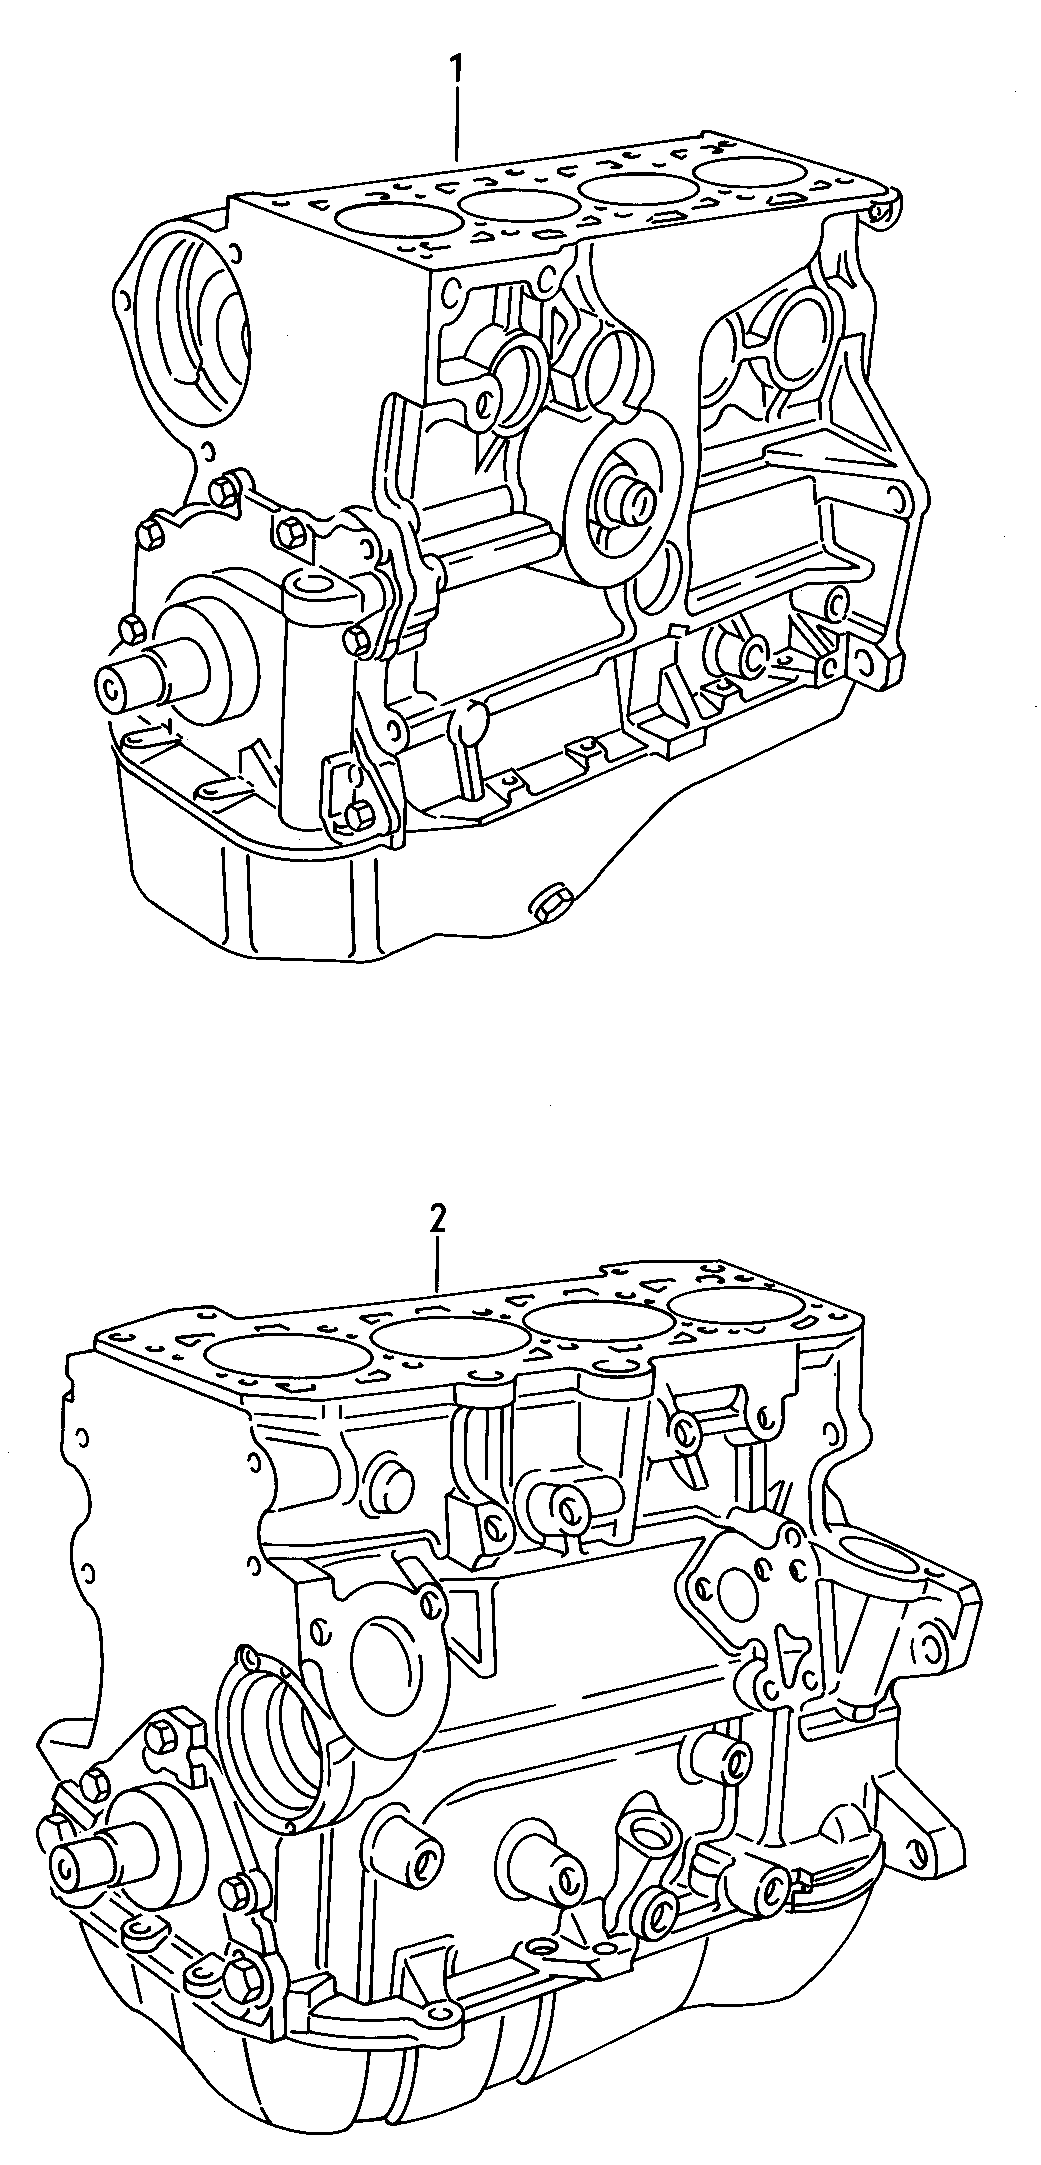 short engine with crankshaft,<br>pistons, oil pump and oil sump  - Scirocco - sci